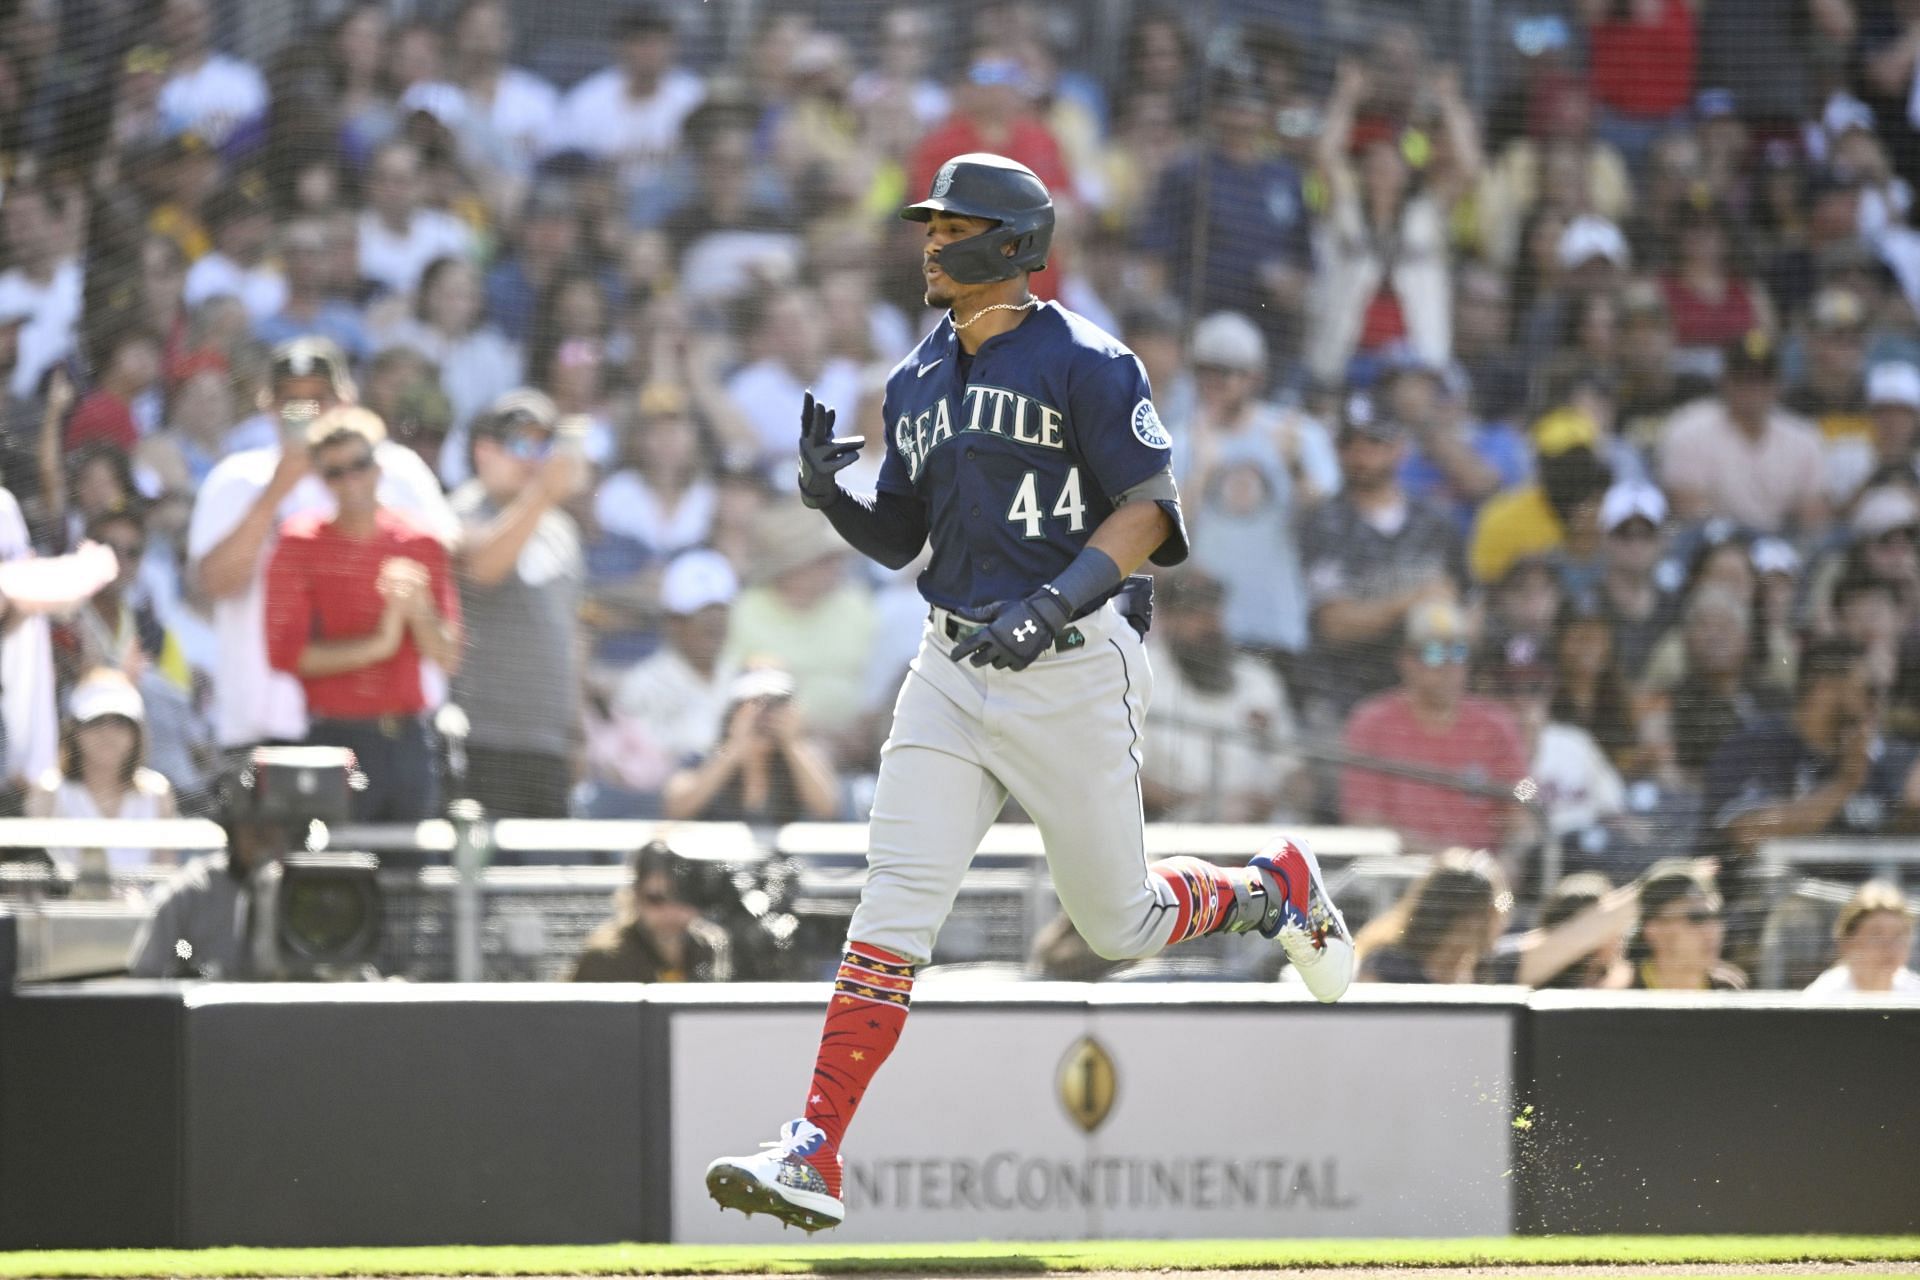 Seattle Mariners rookie outfielder Julio Rodriguez hit his 15th home run of the season tonight against the San Diego Padres.